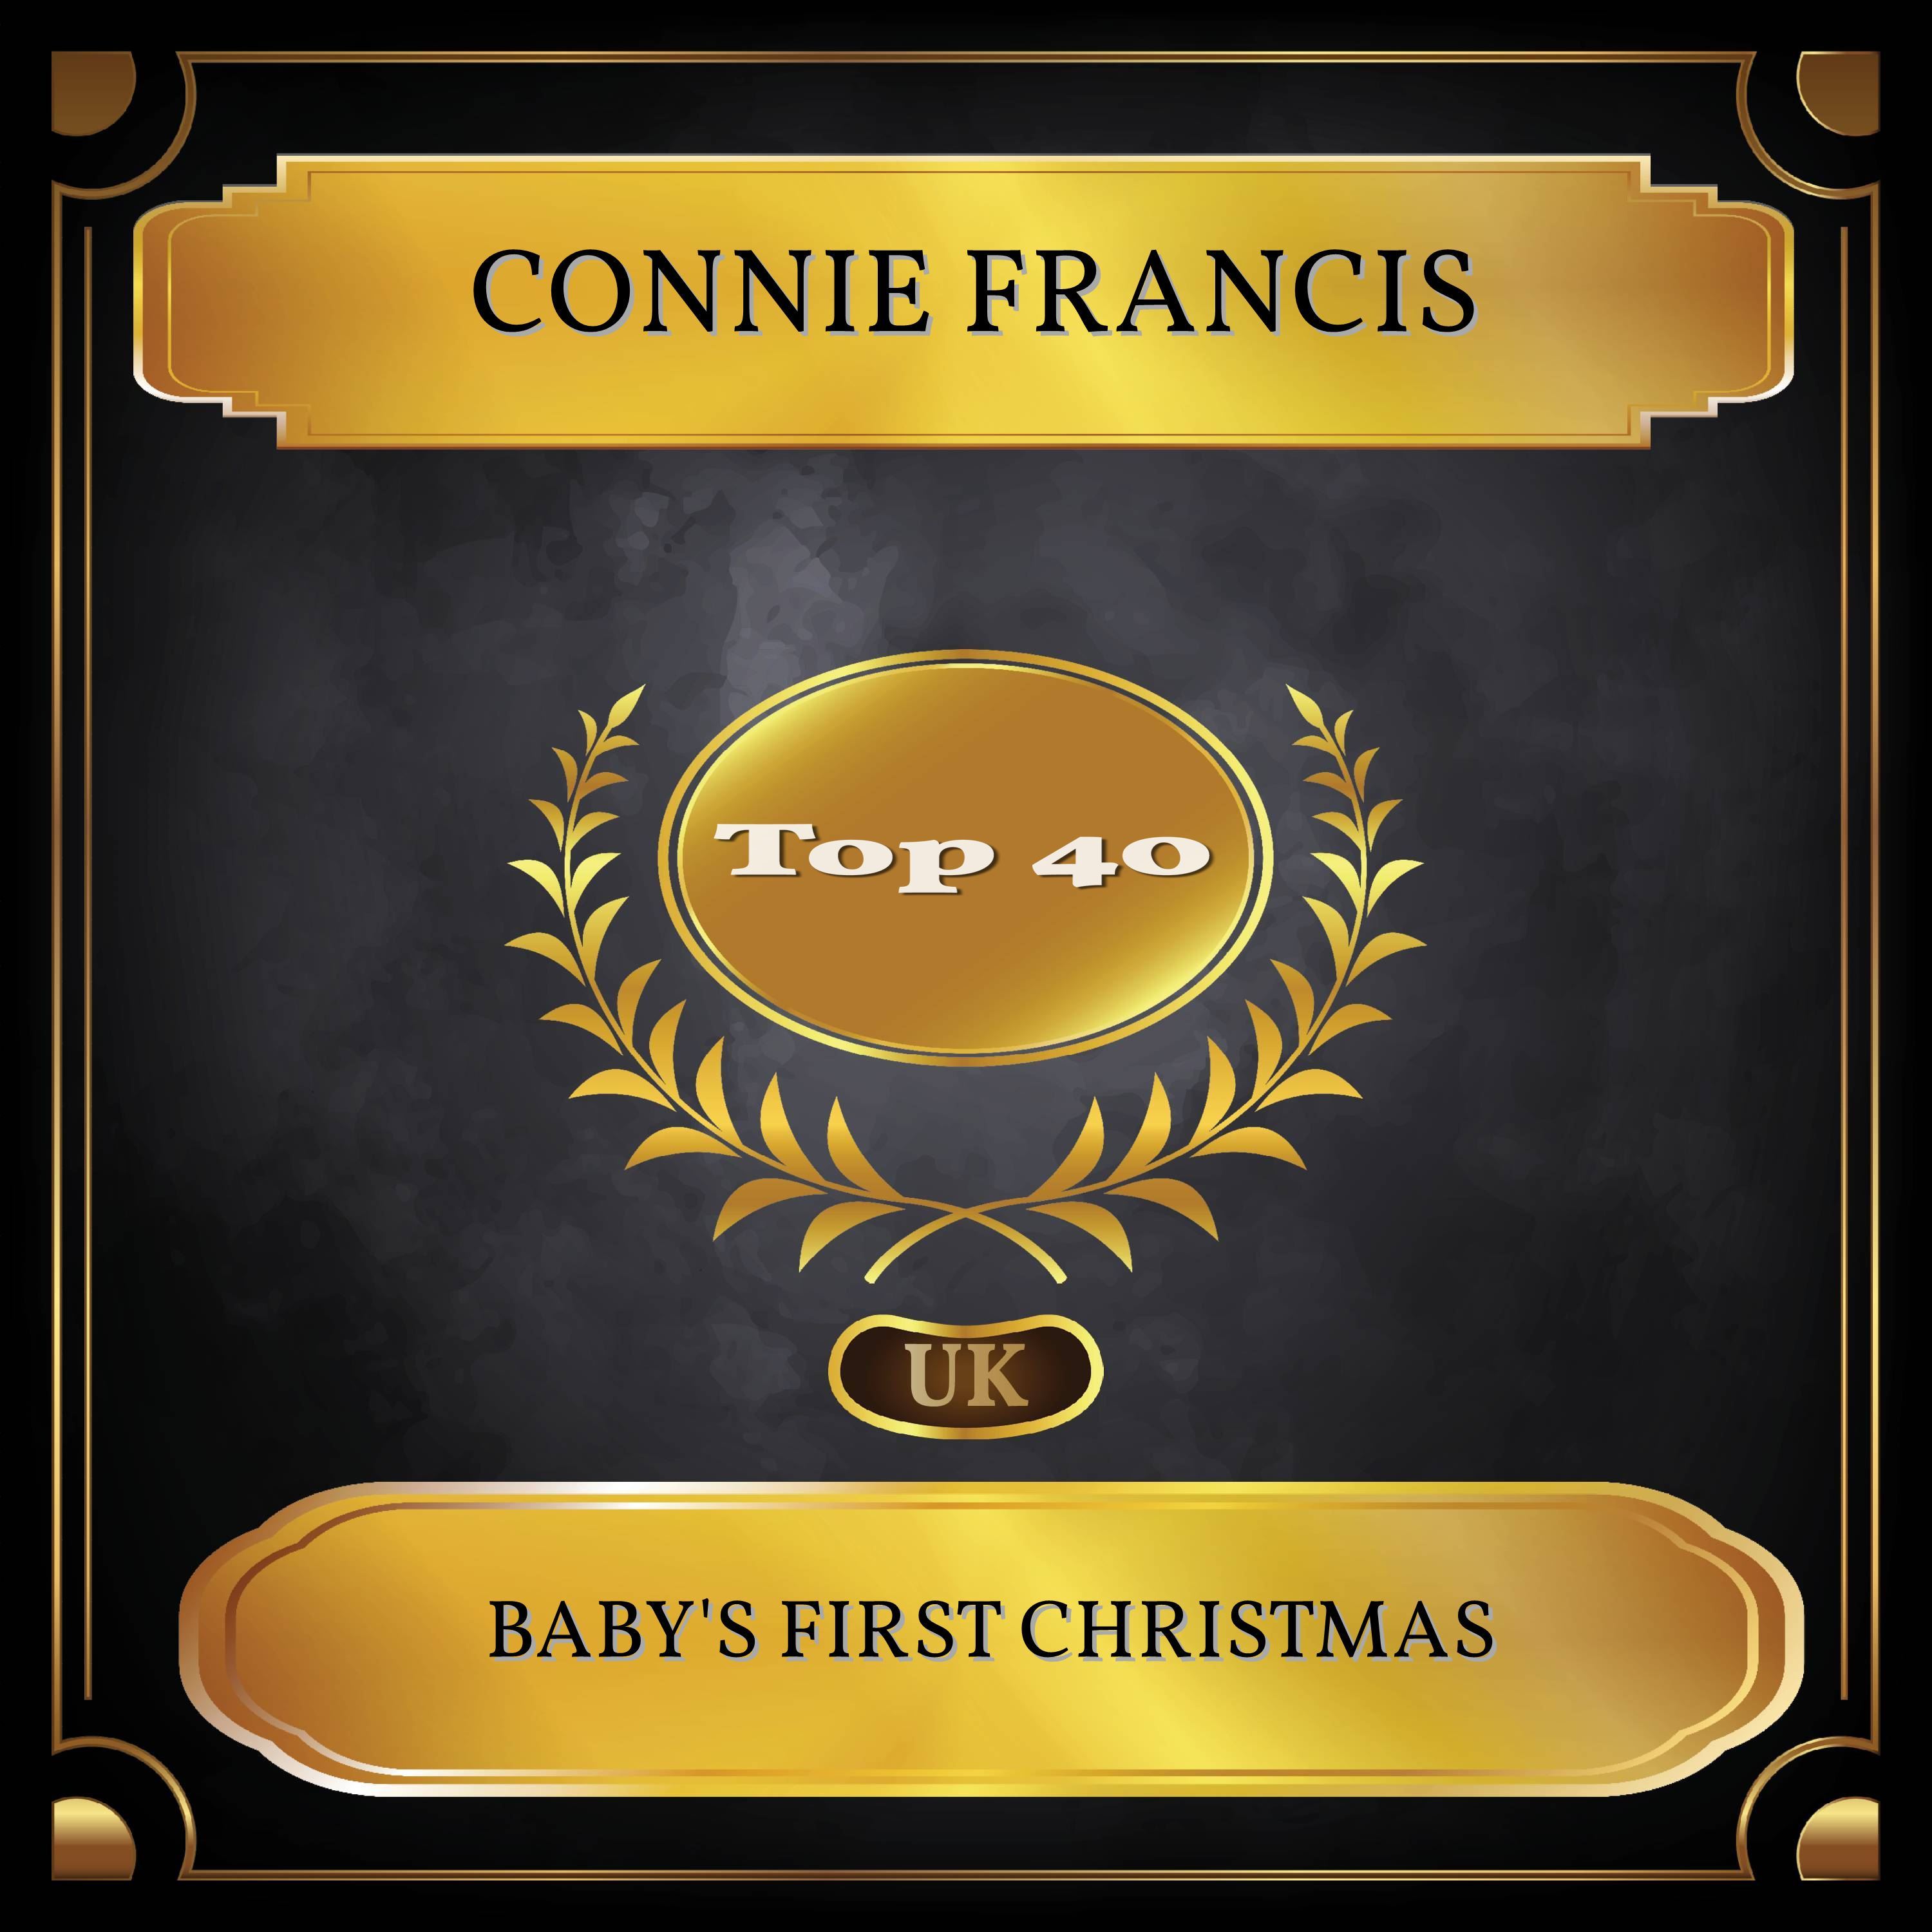 Baby's First Christmas (UK Chart Top 40 - No. 30)